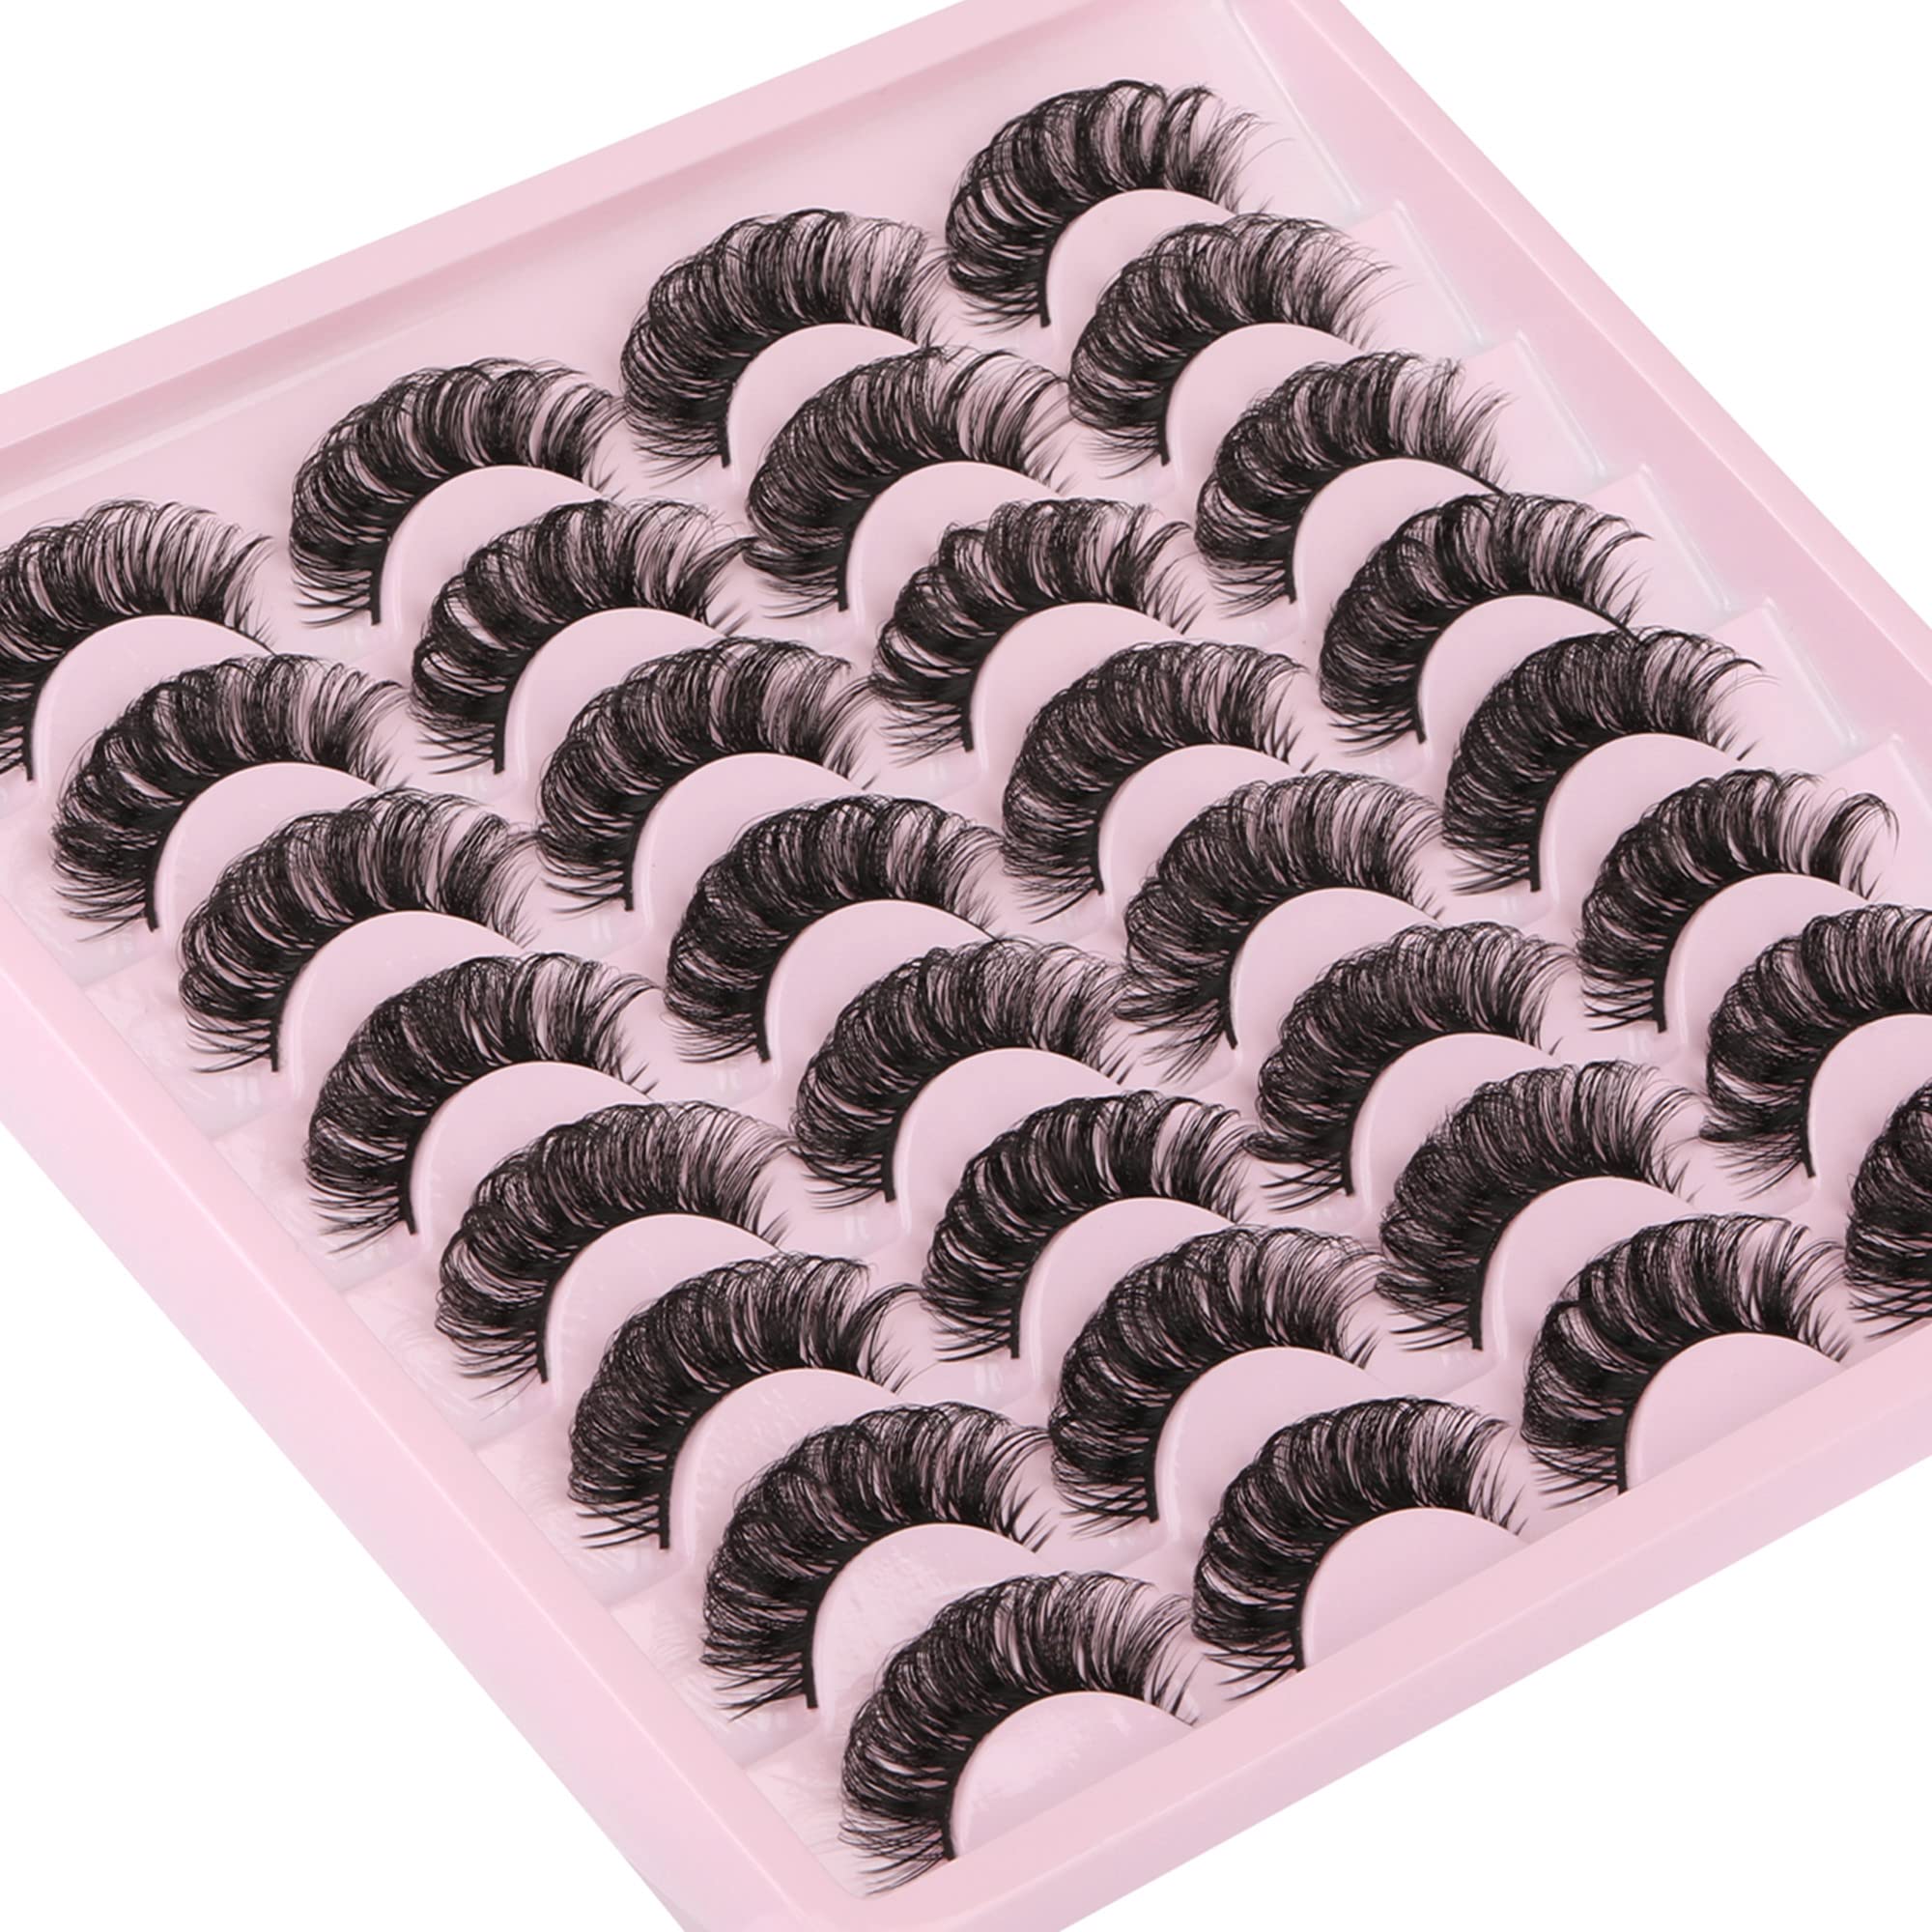 Ruairie 16 Pairs Russian Strip Lashes Fluffy Volume False Eyelashes D Curl Wispy Curly Faux Mink Lashes Pack